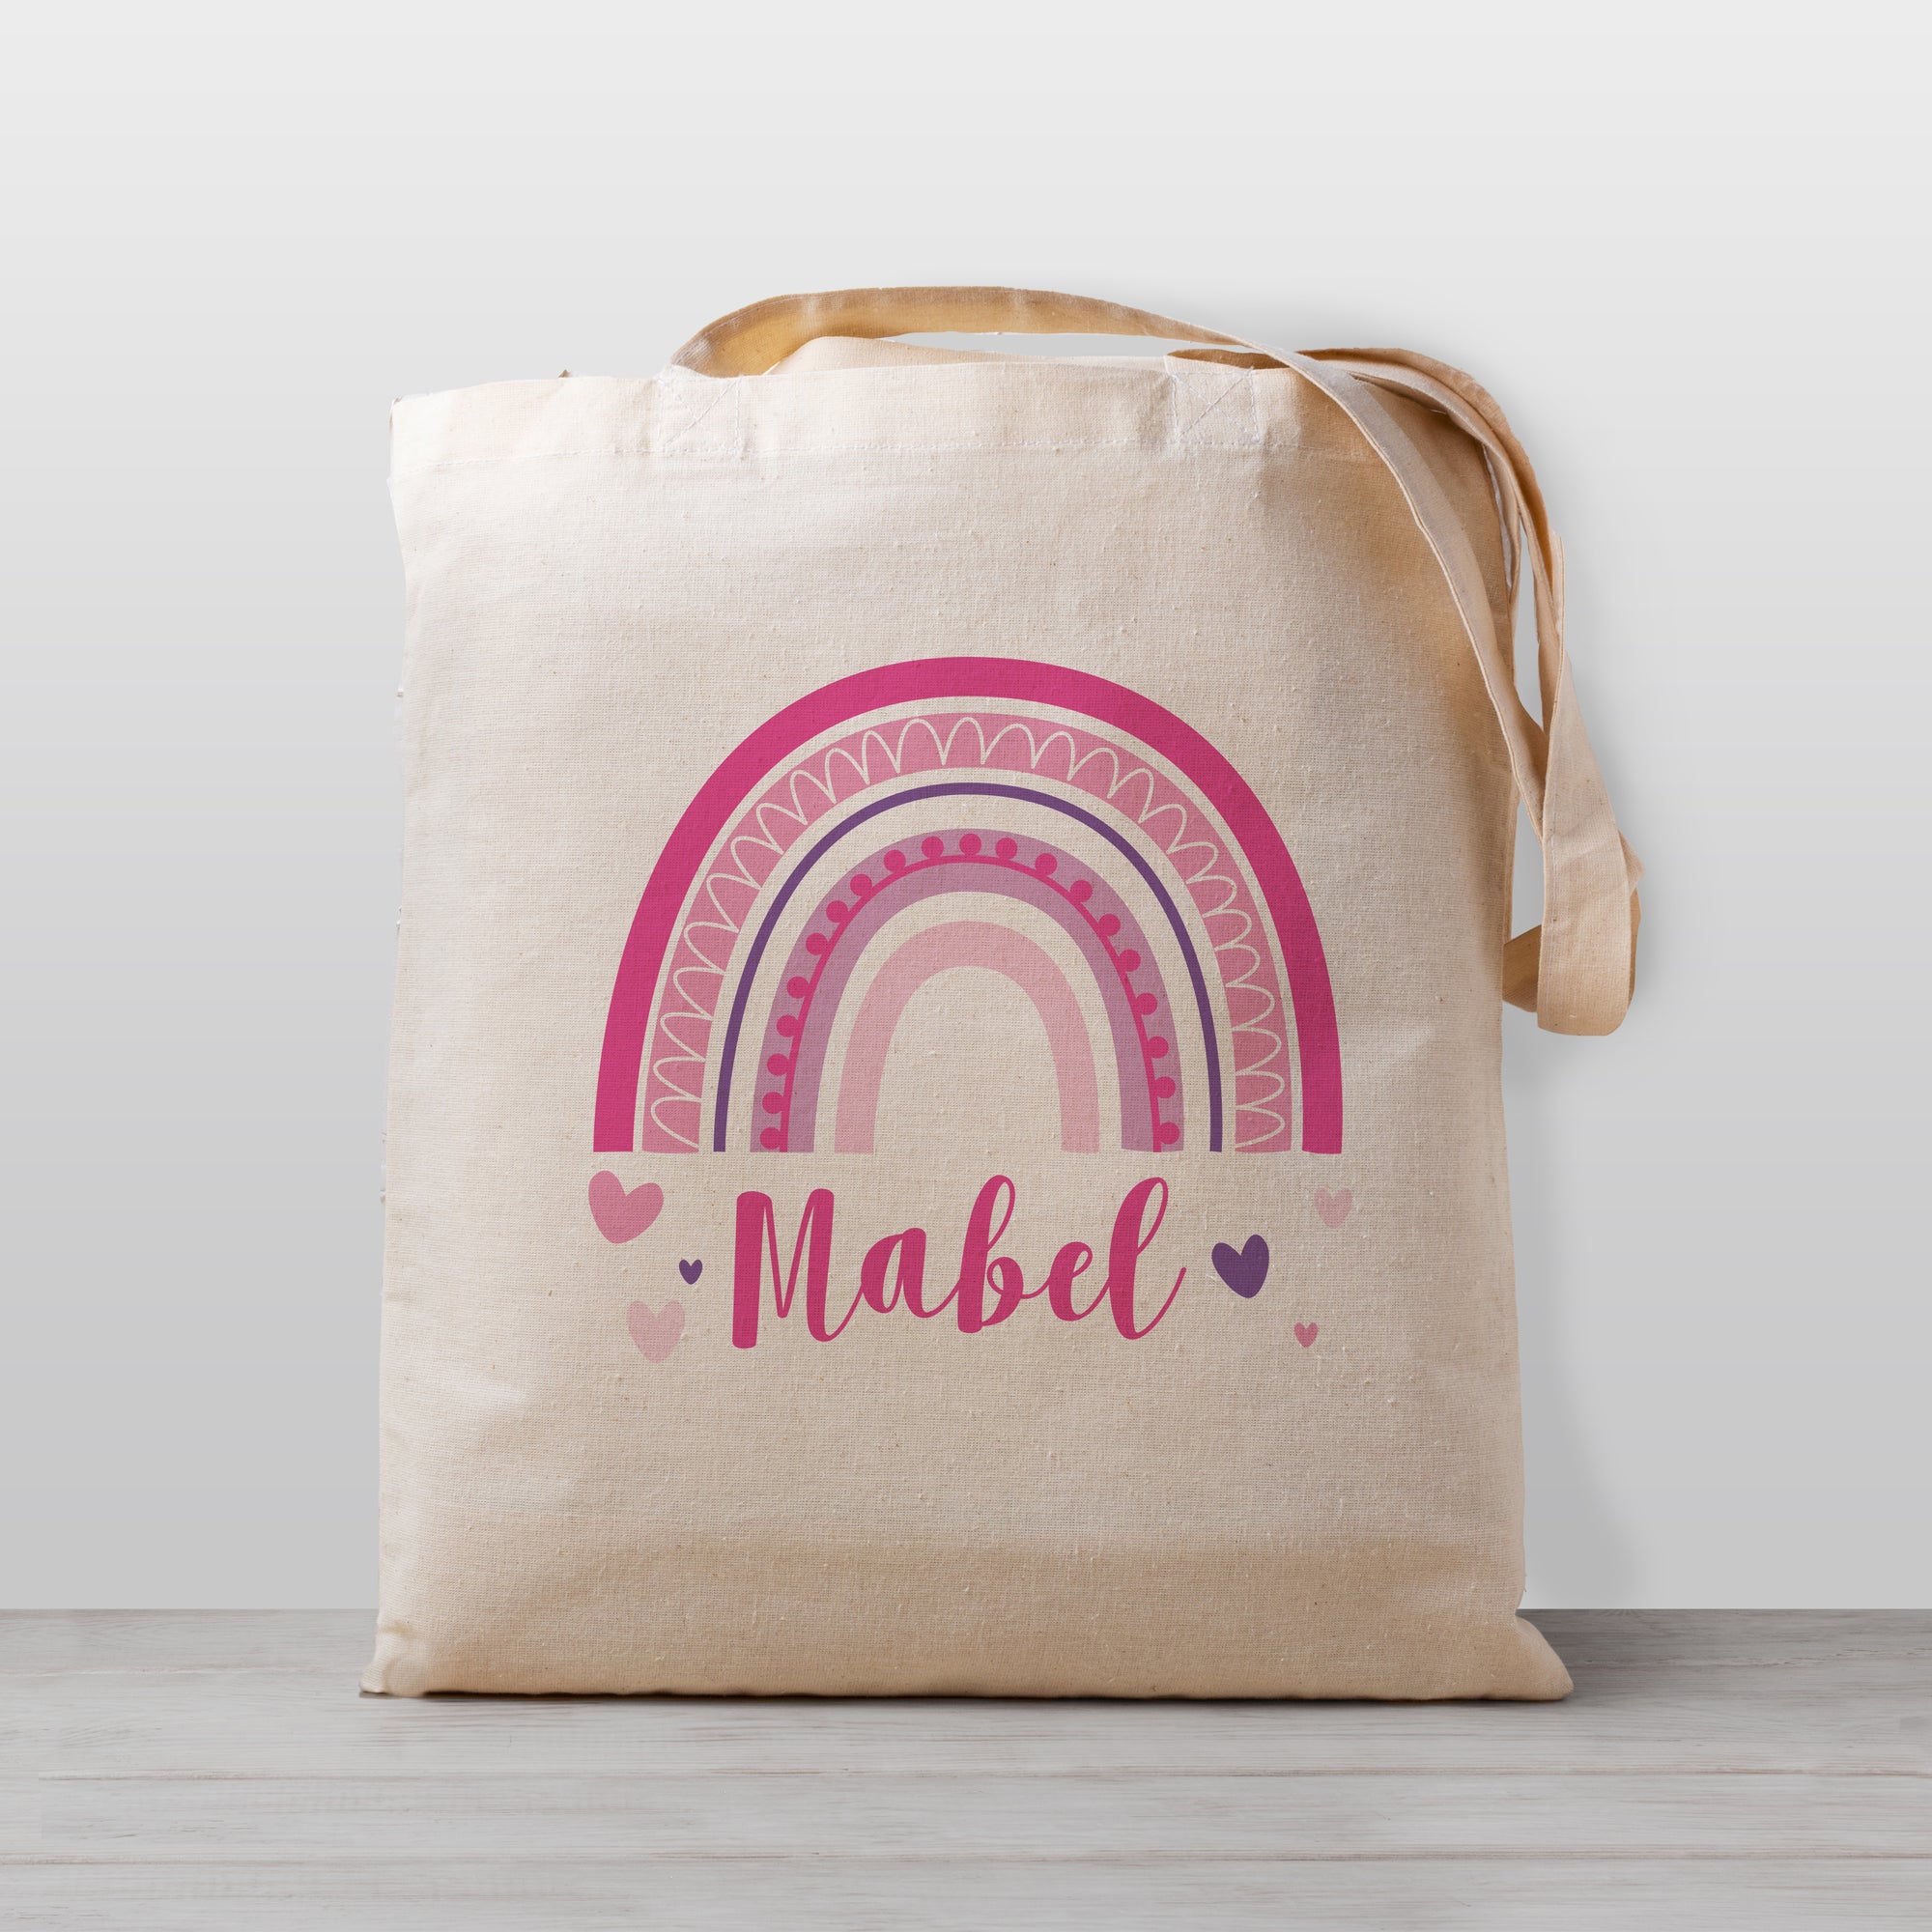 Rainbow Personalized Girl Tote Bag with hearts and a whimsical design. Tote bags are 100% cotton and sized for a child to carry easily. Perfect for your preschool or daycare bag